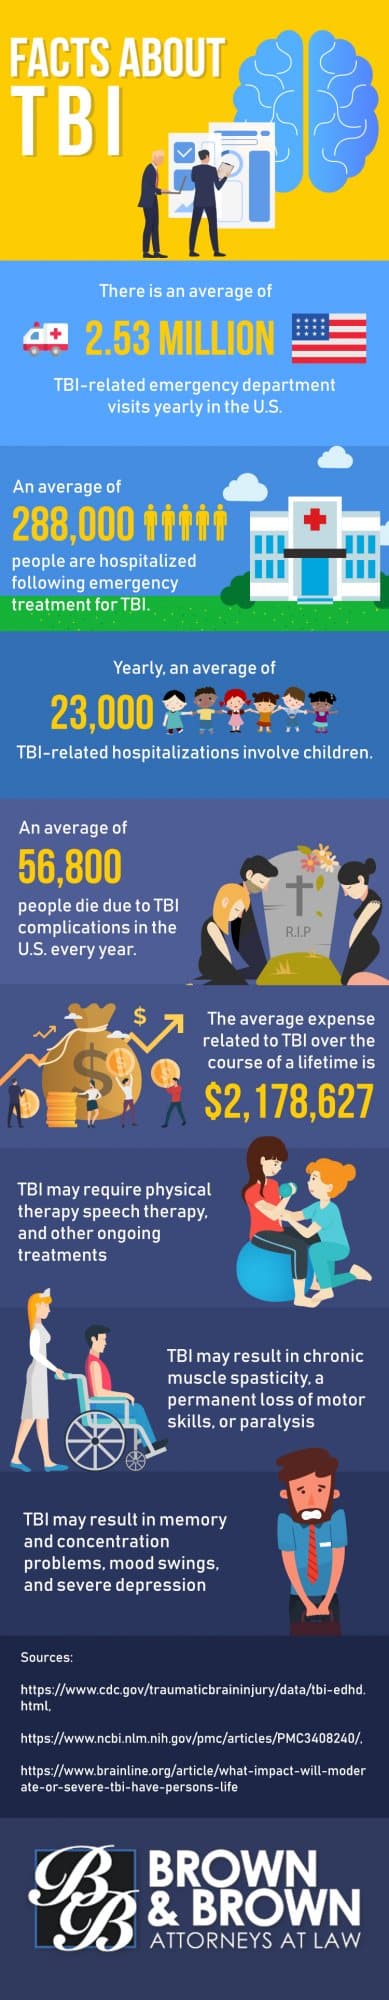 BrownLaw Key Facts About Traumatic Brain Injury